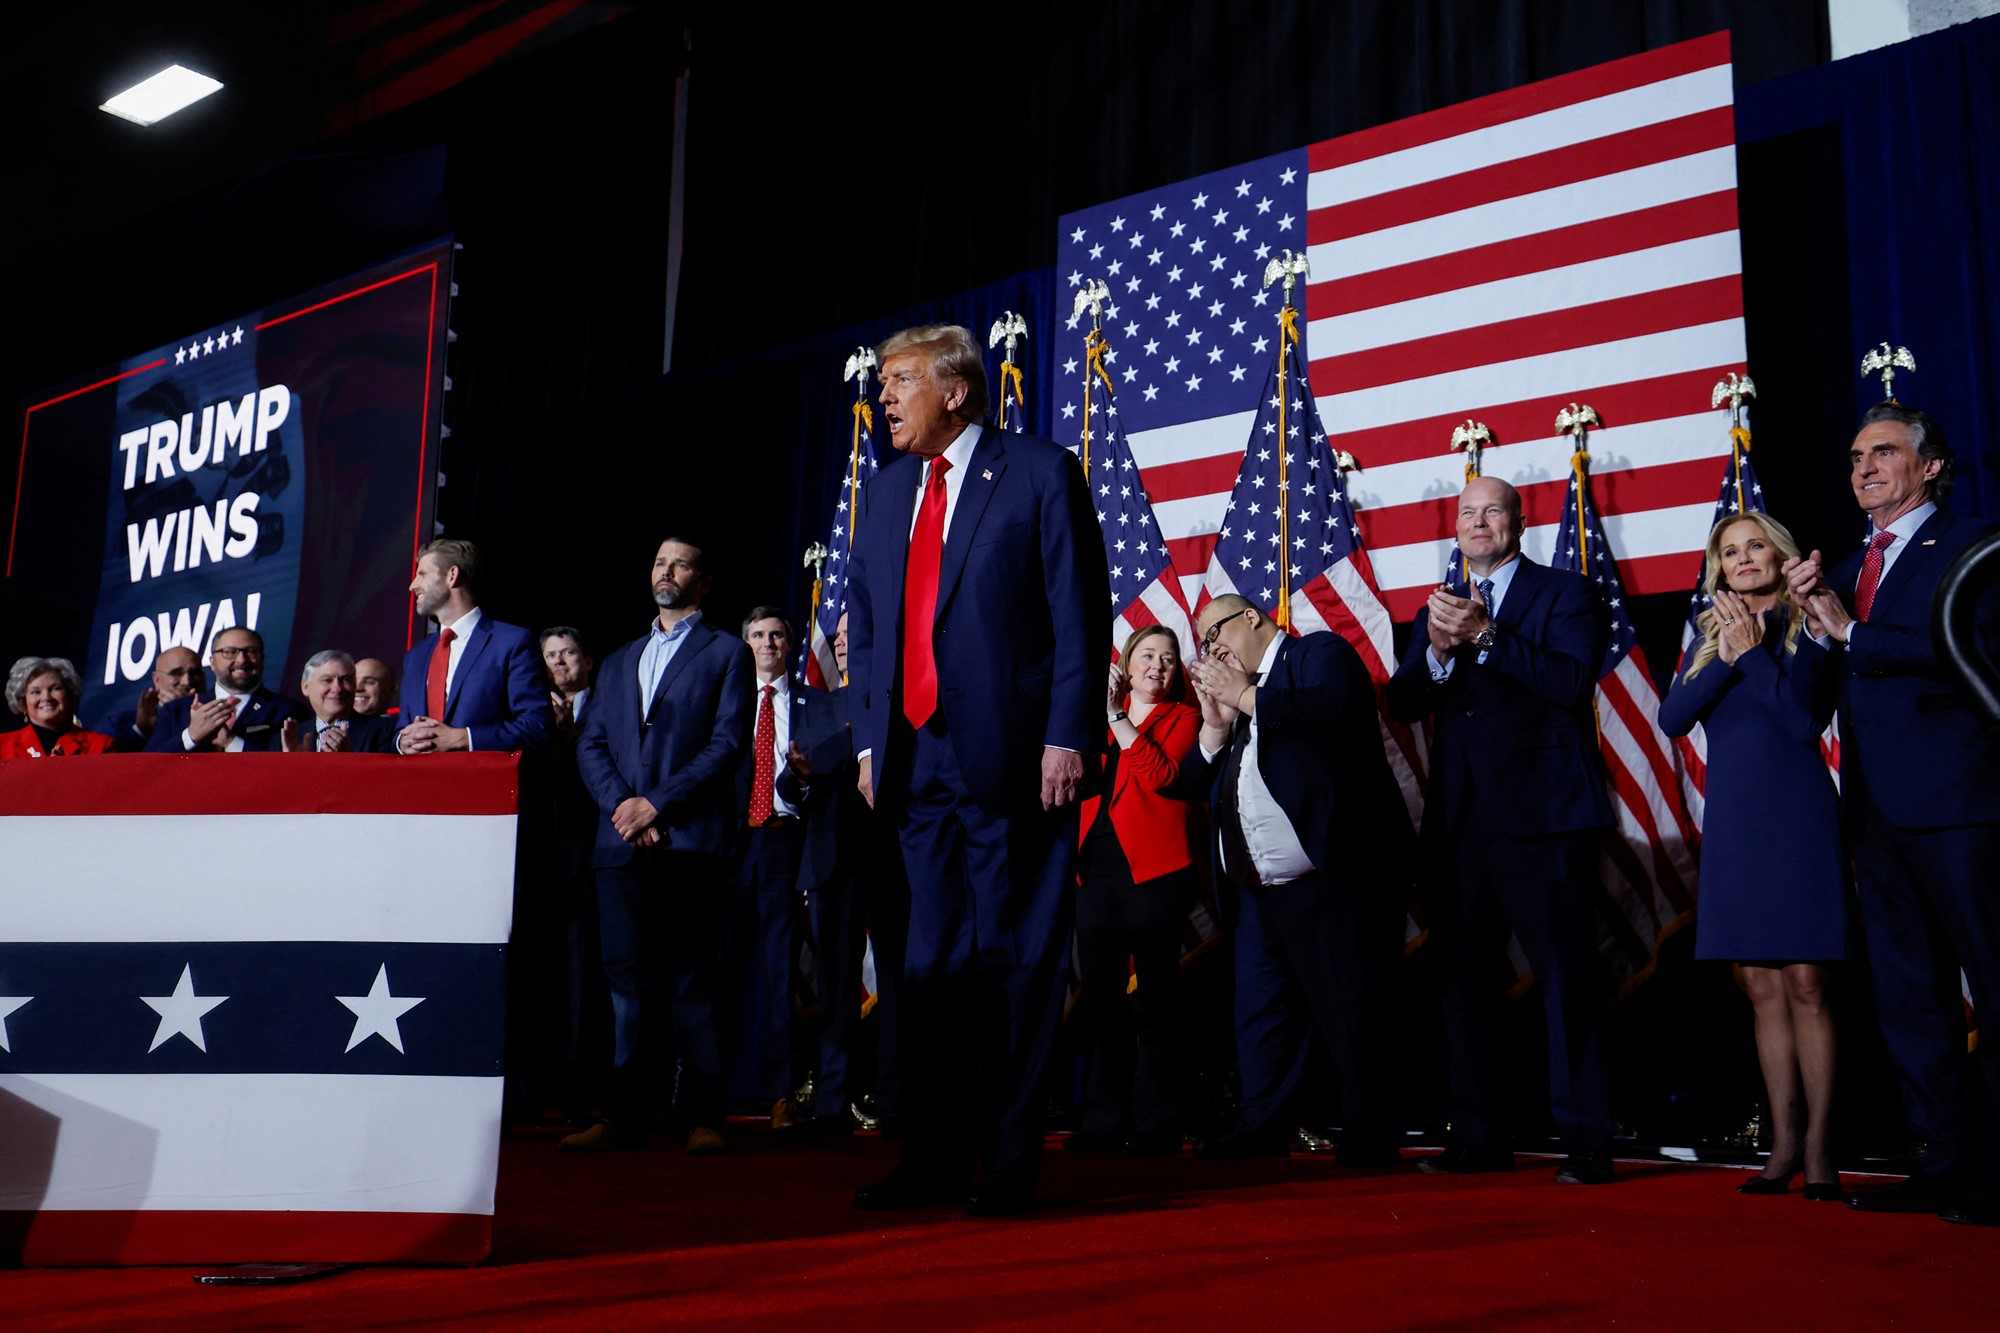 Donald Trump stands on stage surrounded by people clapping, and USA flags